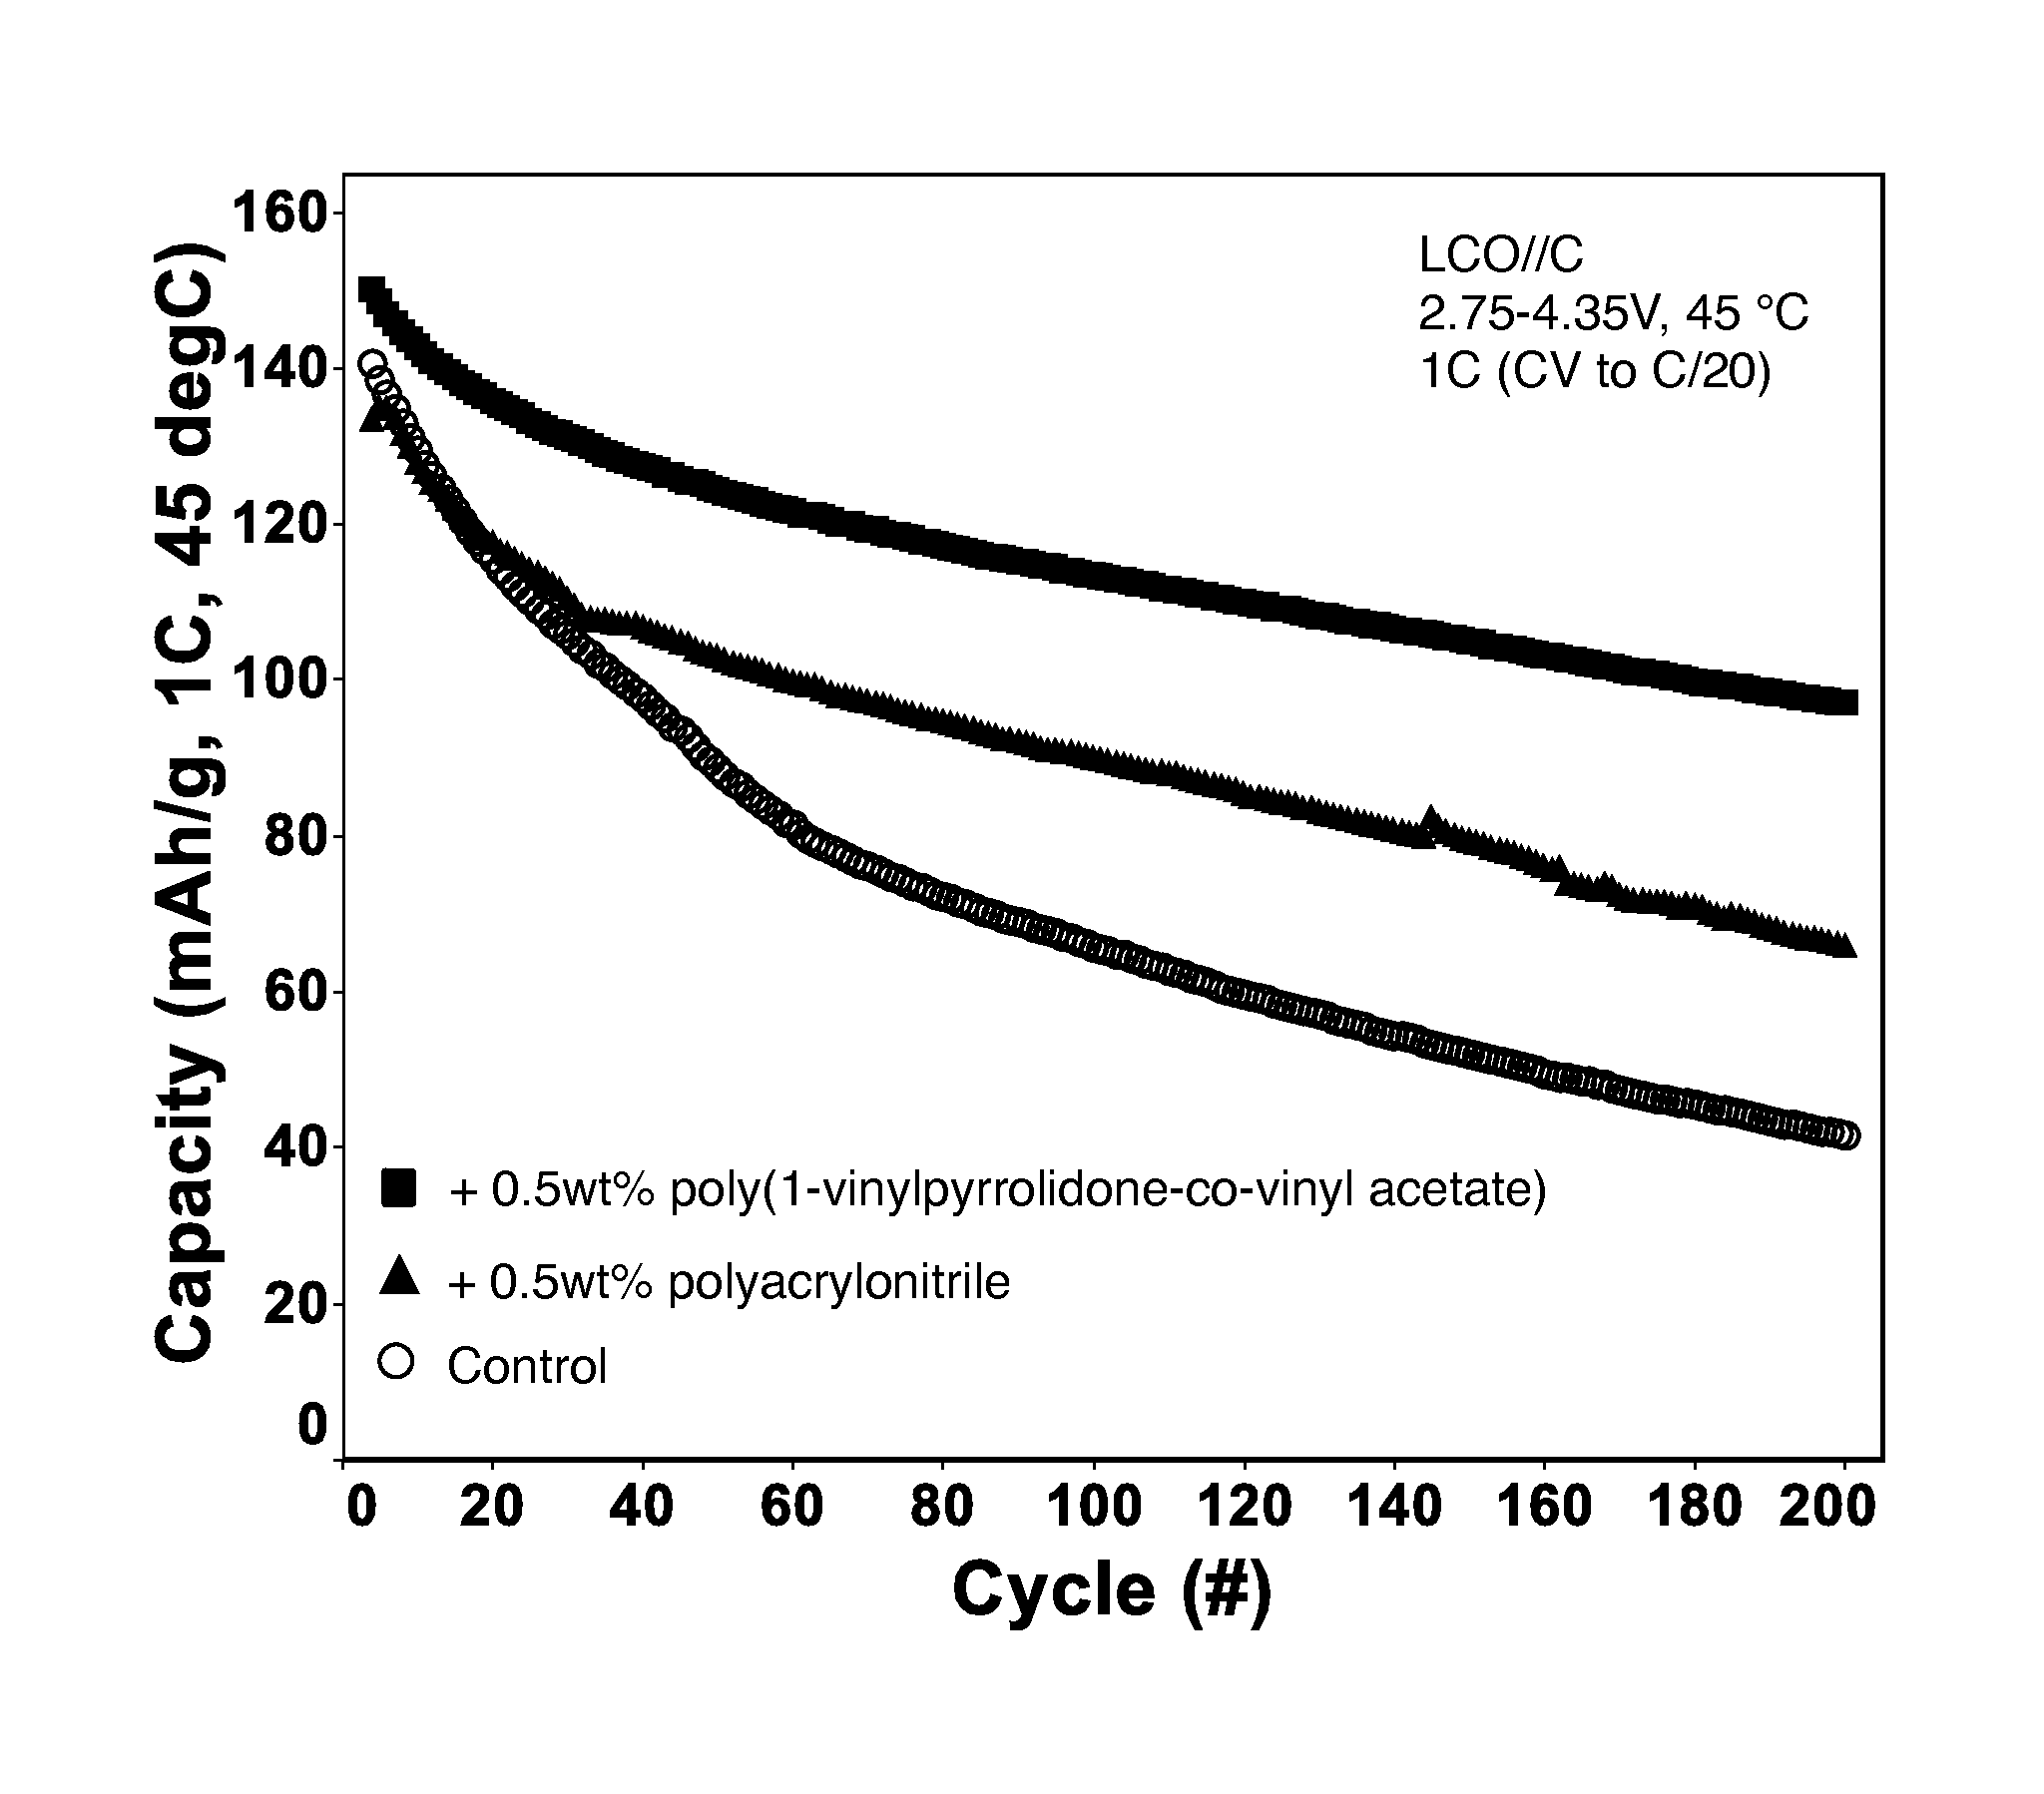 Electrolyte solutions for high energy cathode materials and methods for use